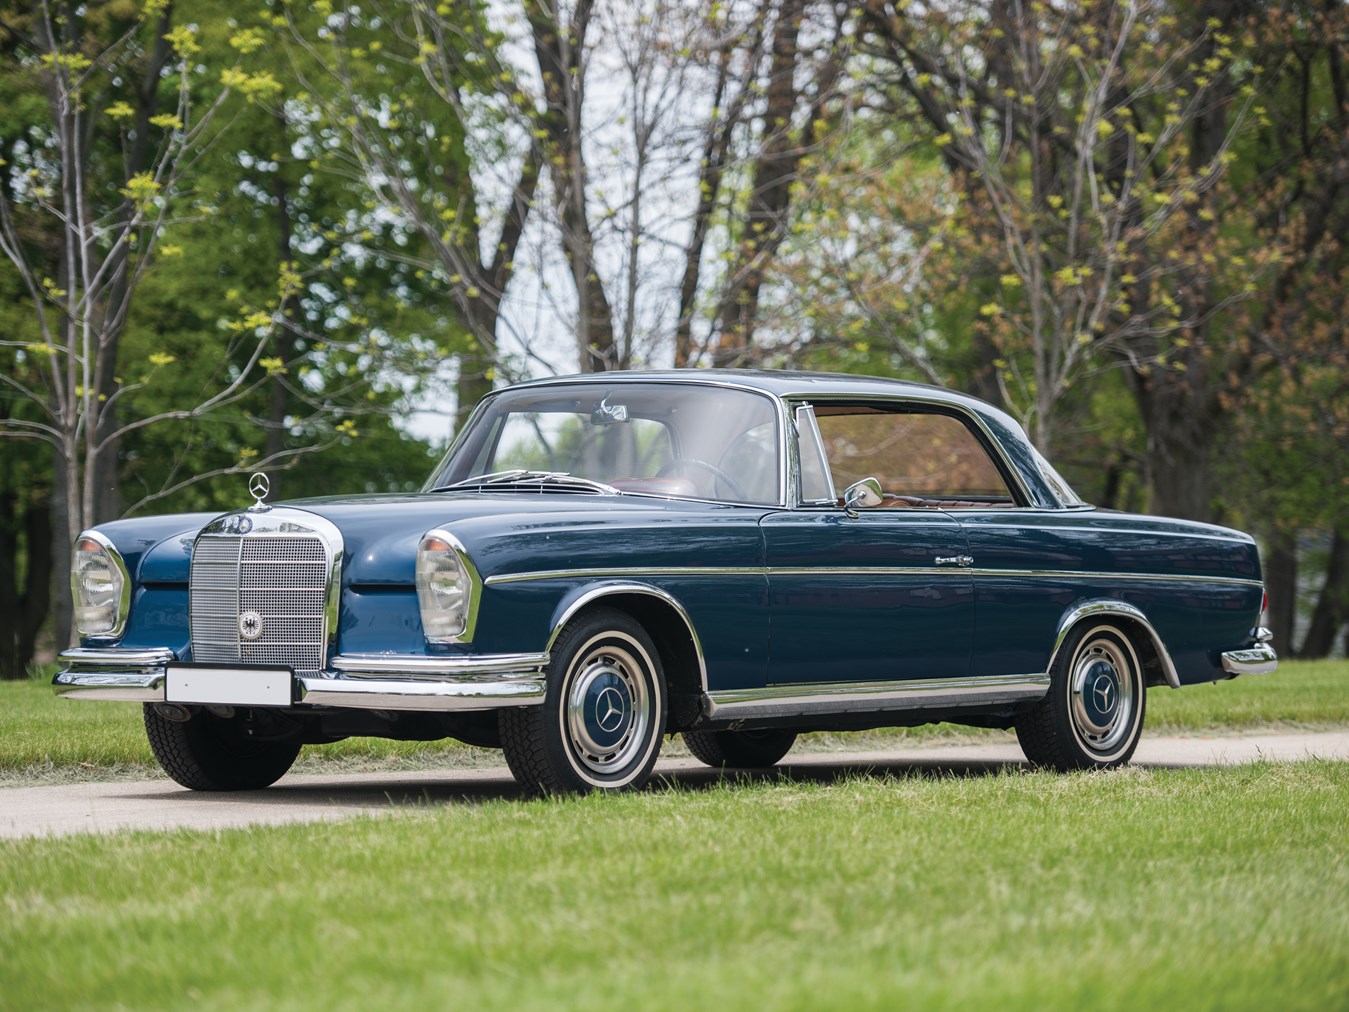 This 1965 Mercedes-Benz 300 SE coupé possesses a clean and unmistakably classic Mercedes-Benz look.